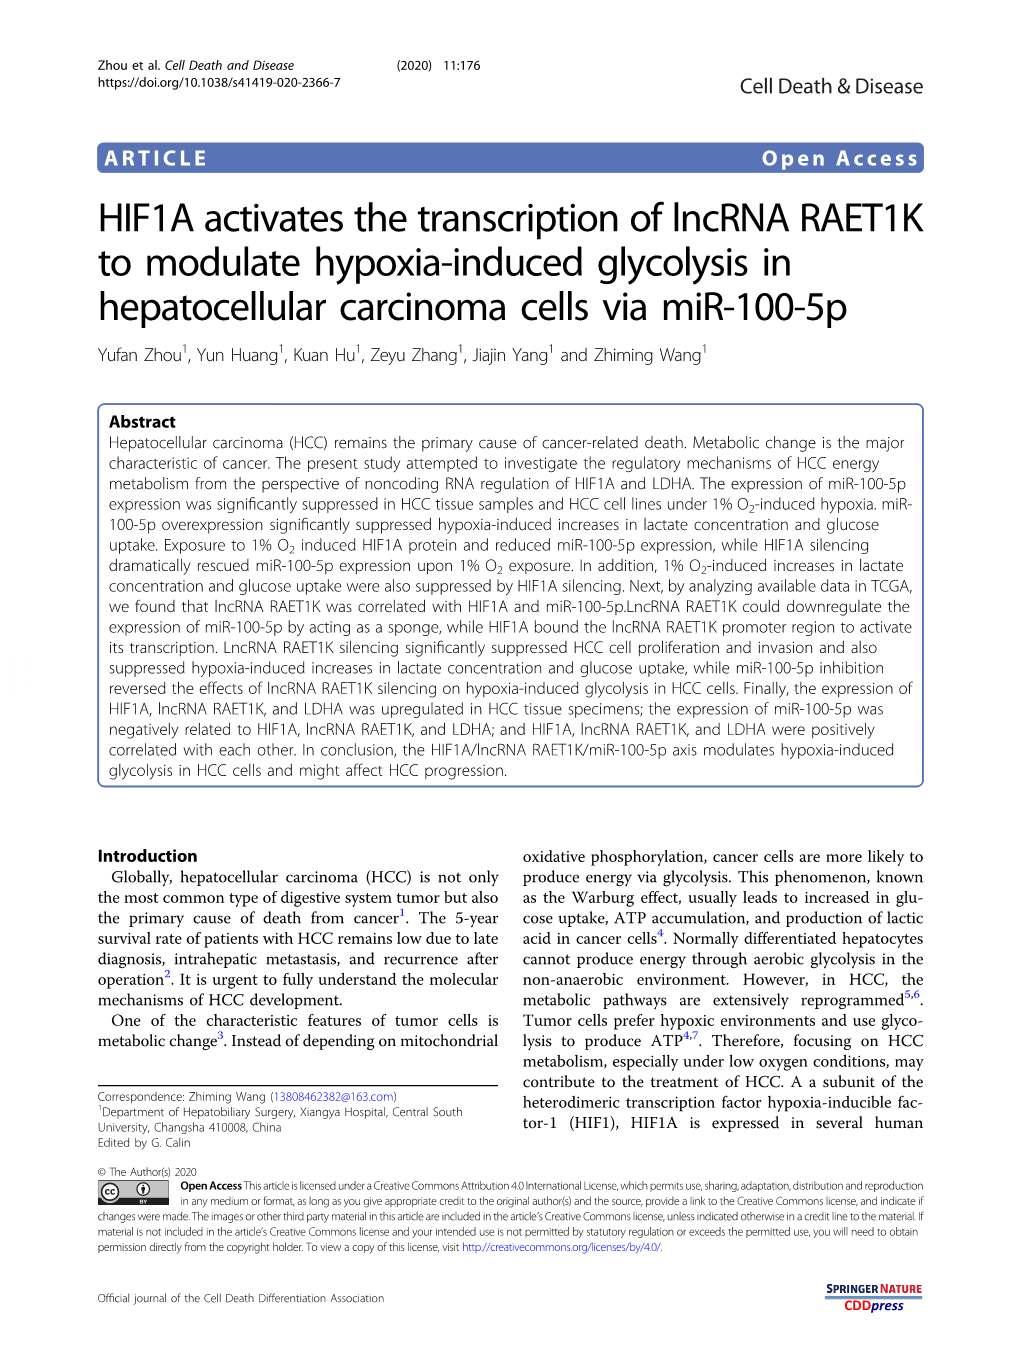 HIF1A Activates the Transcription of Lncrna RAET1K to Modulate